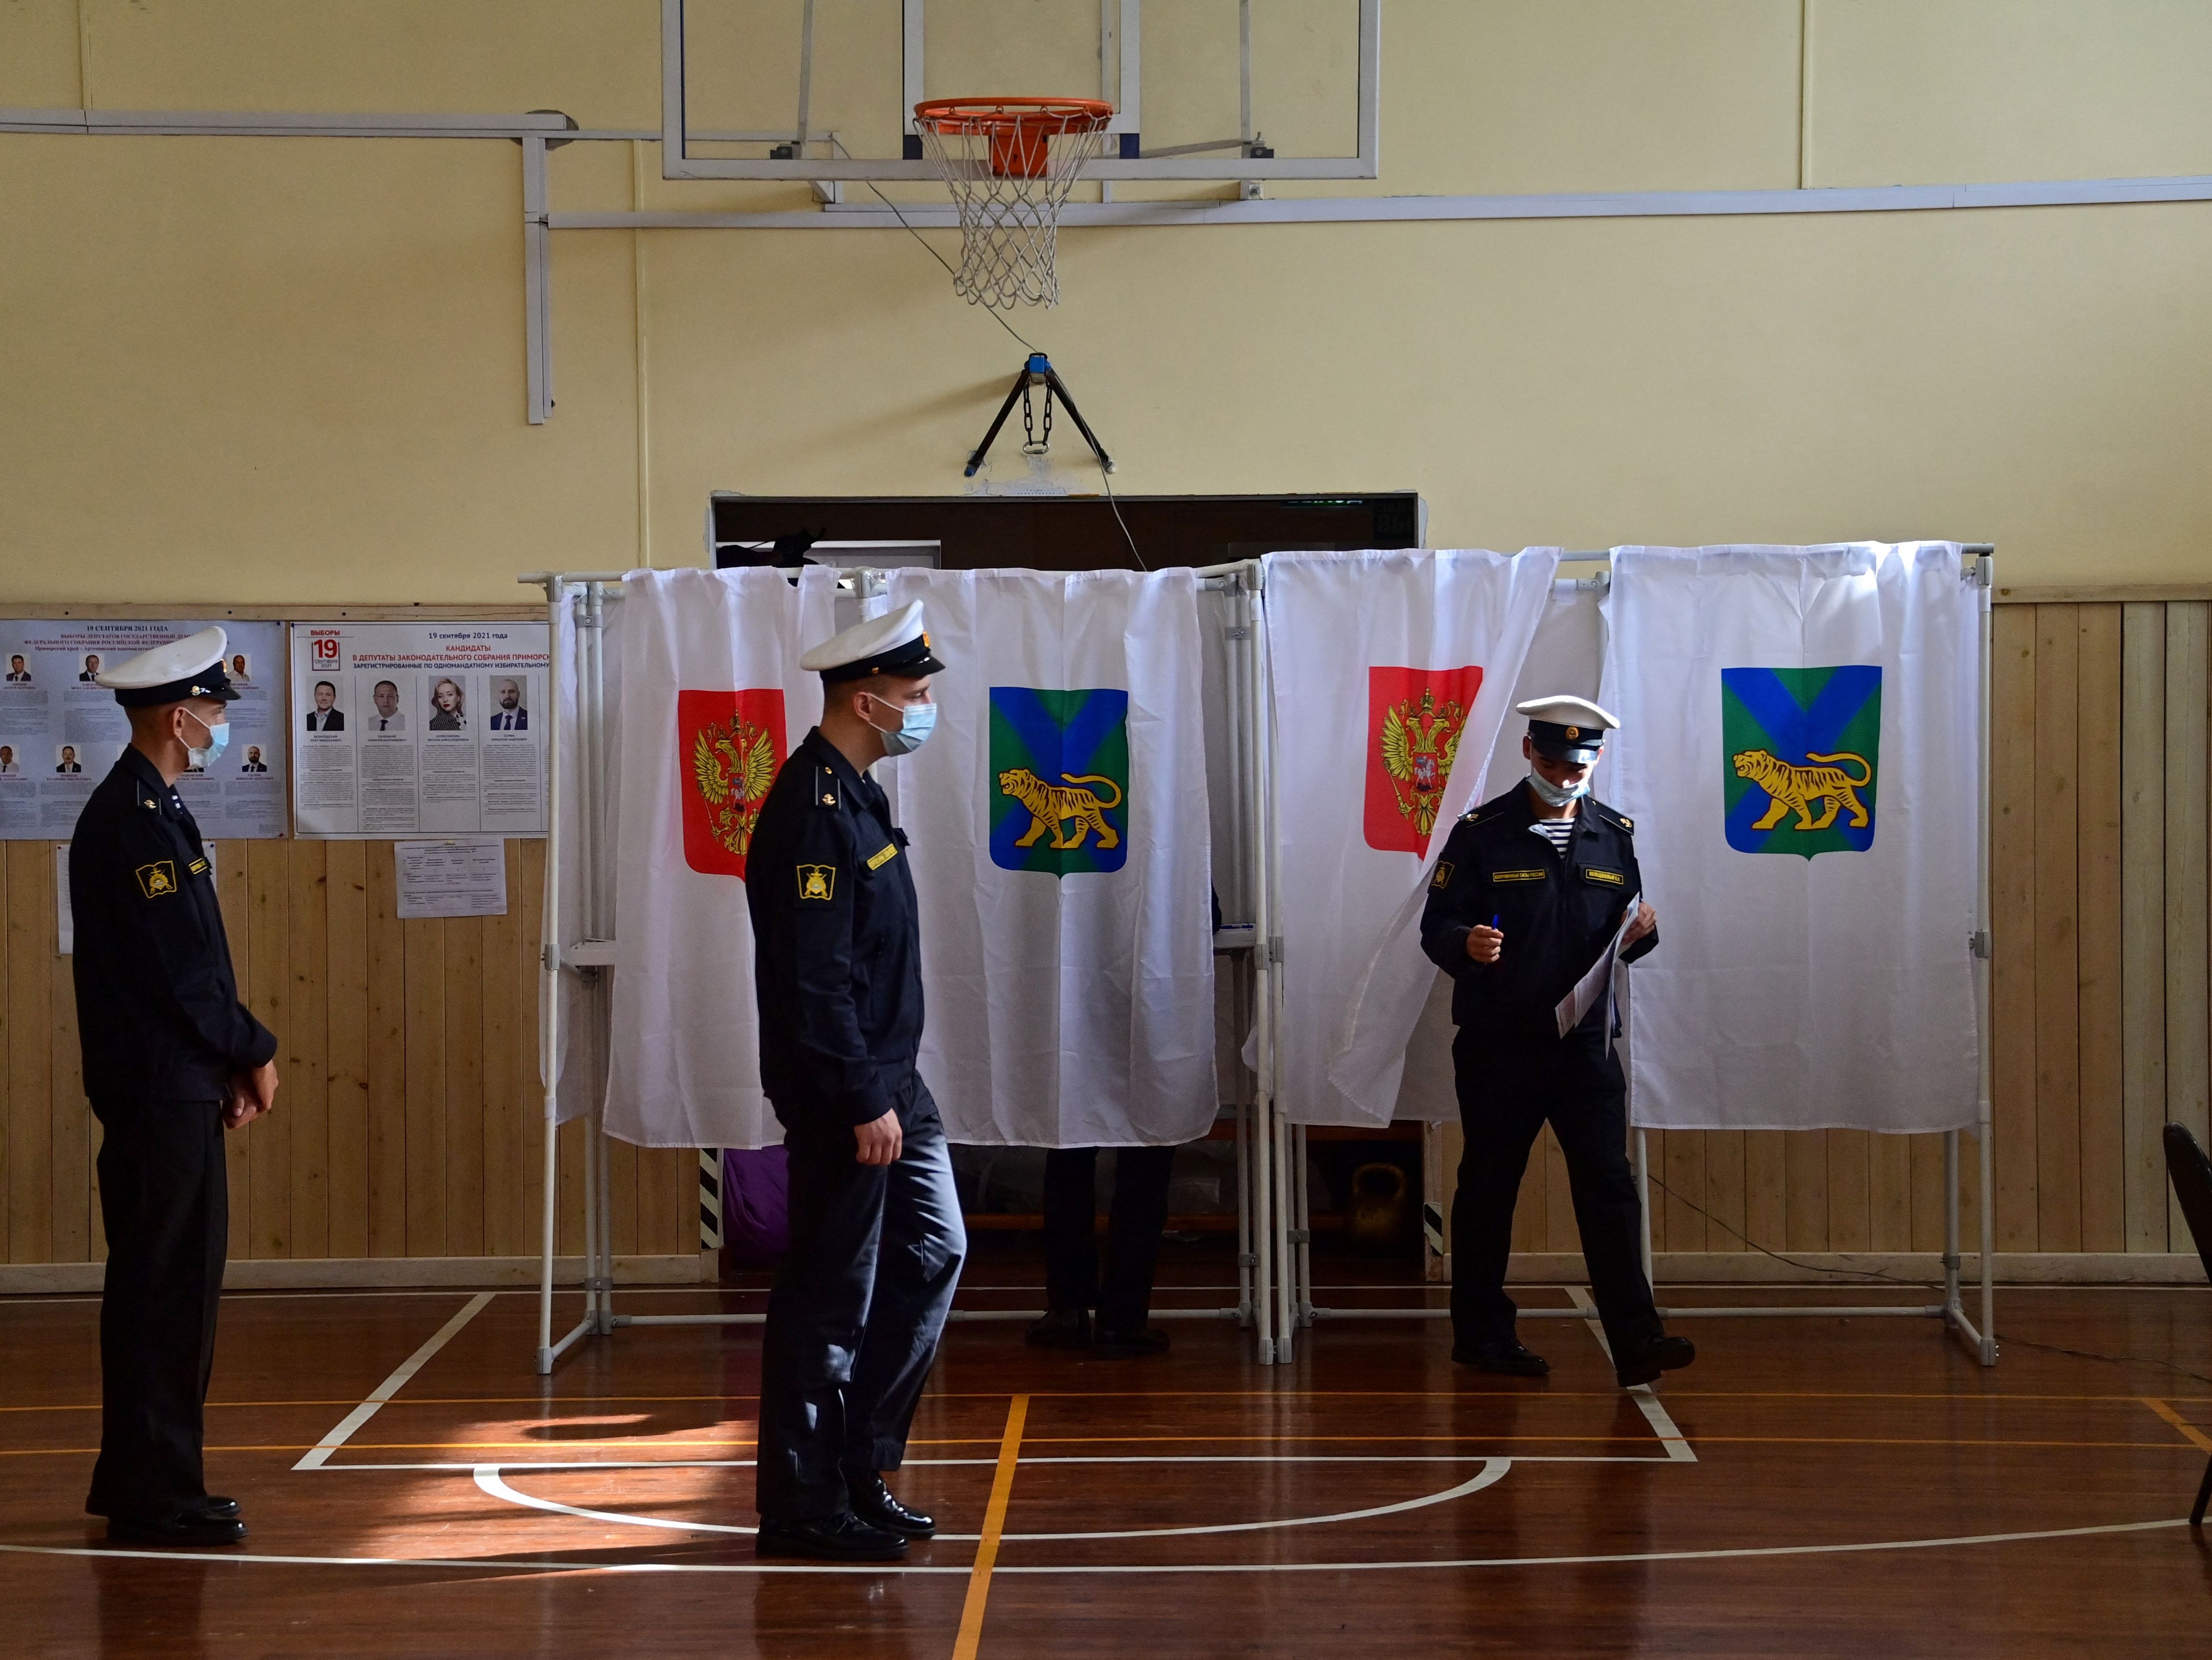 Naval cadets vote on the first day of the three-day parliamentary election in the far eastern city of Vladivostok